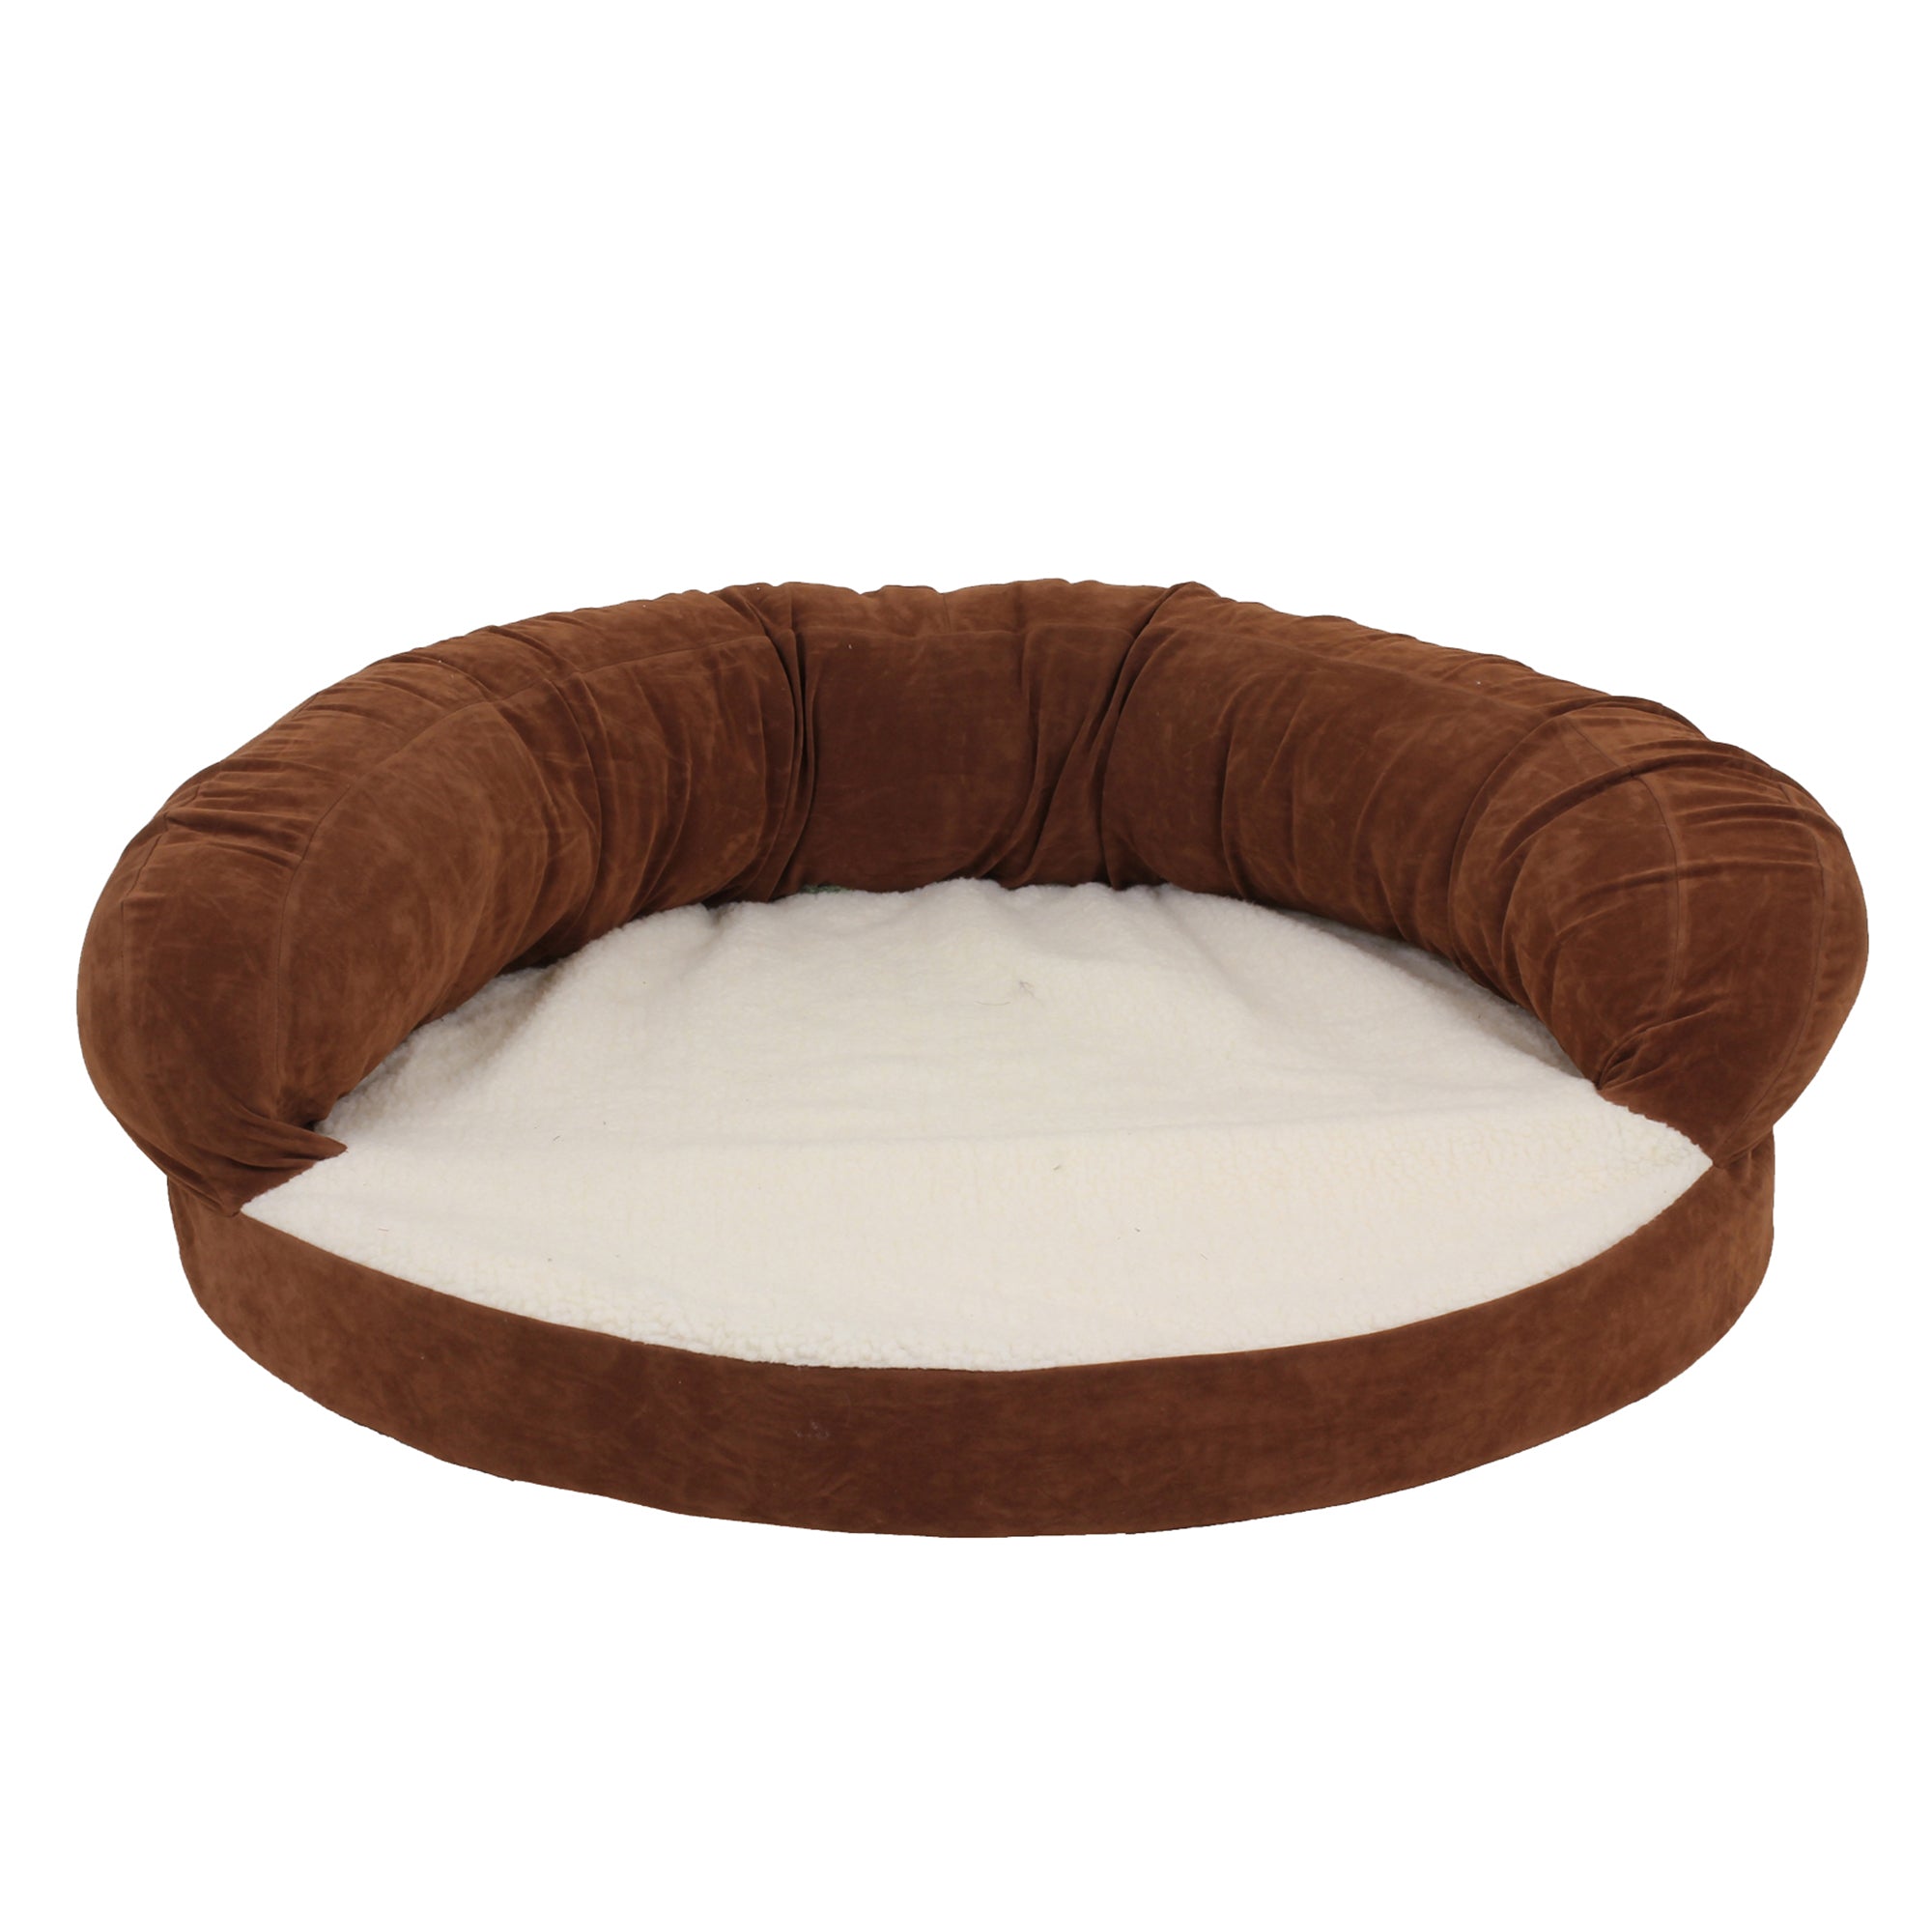 orthopedic dog bed for senior dogs chocolate brown